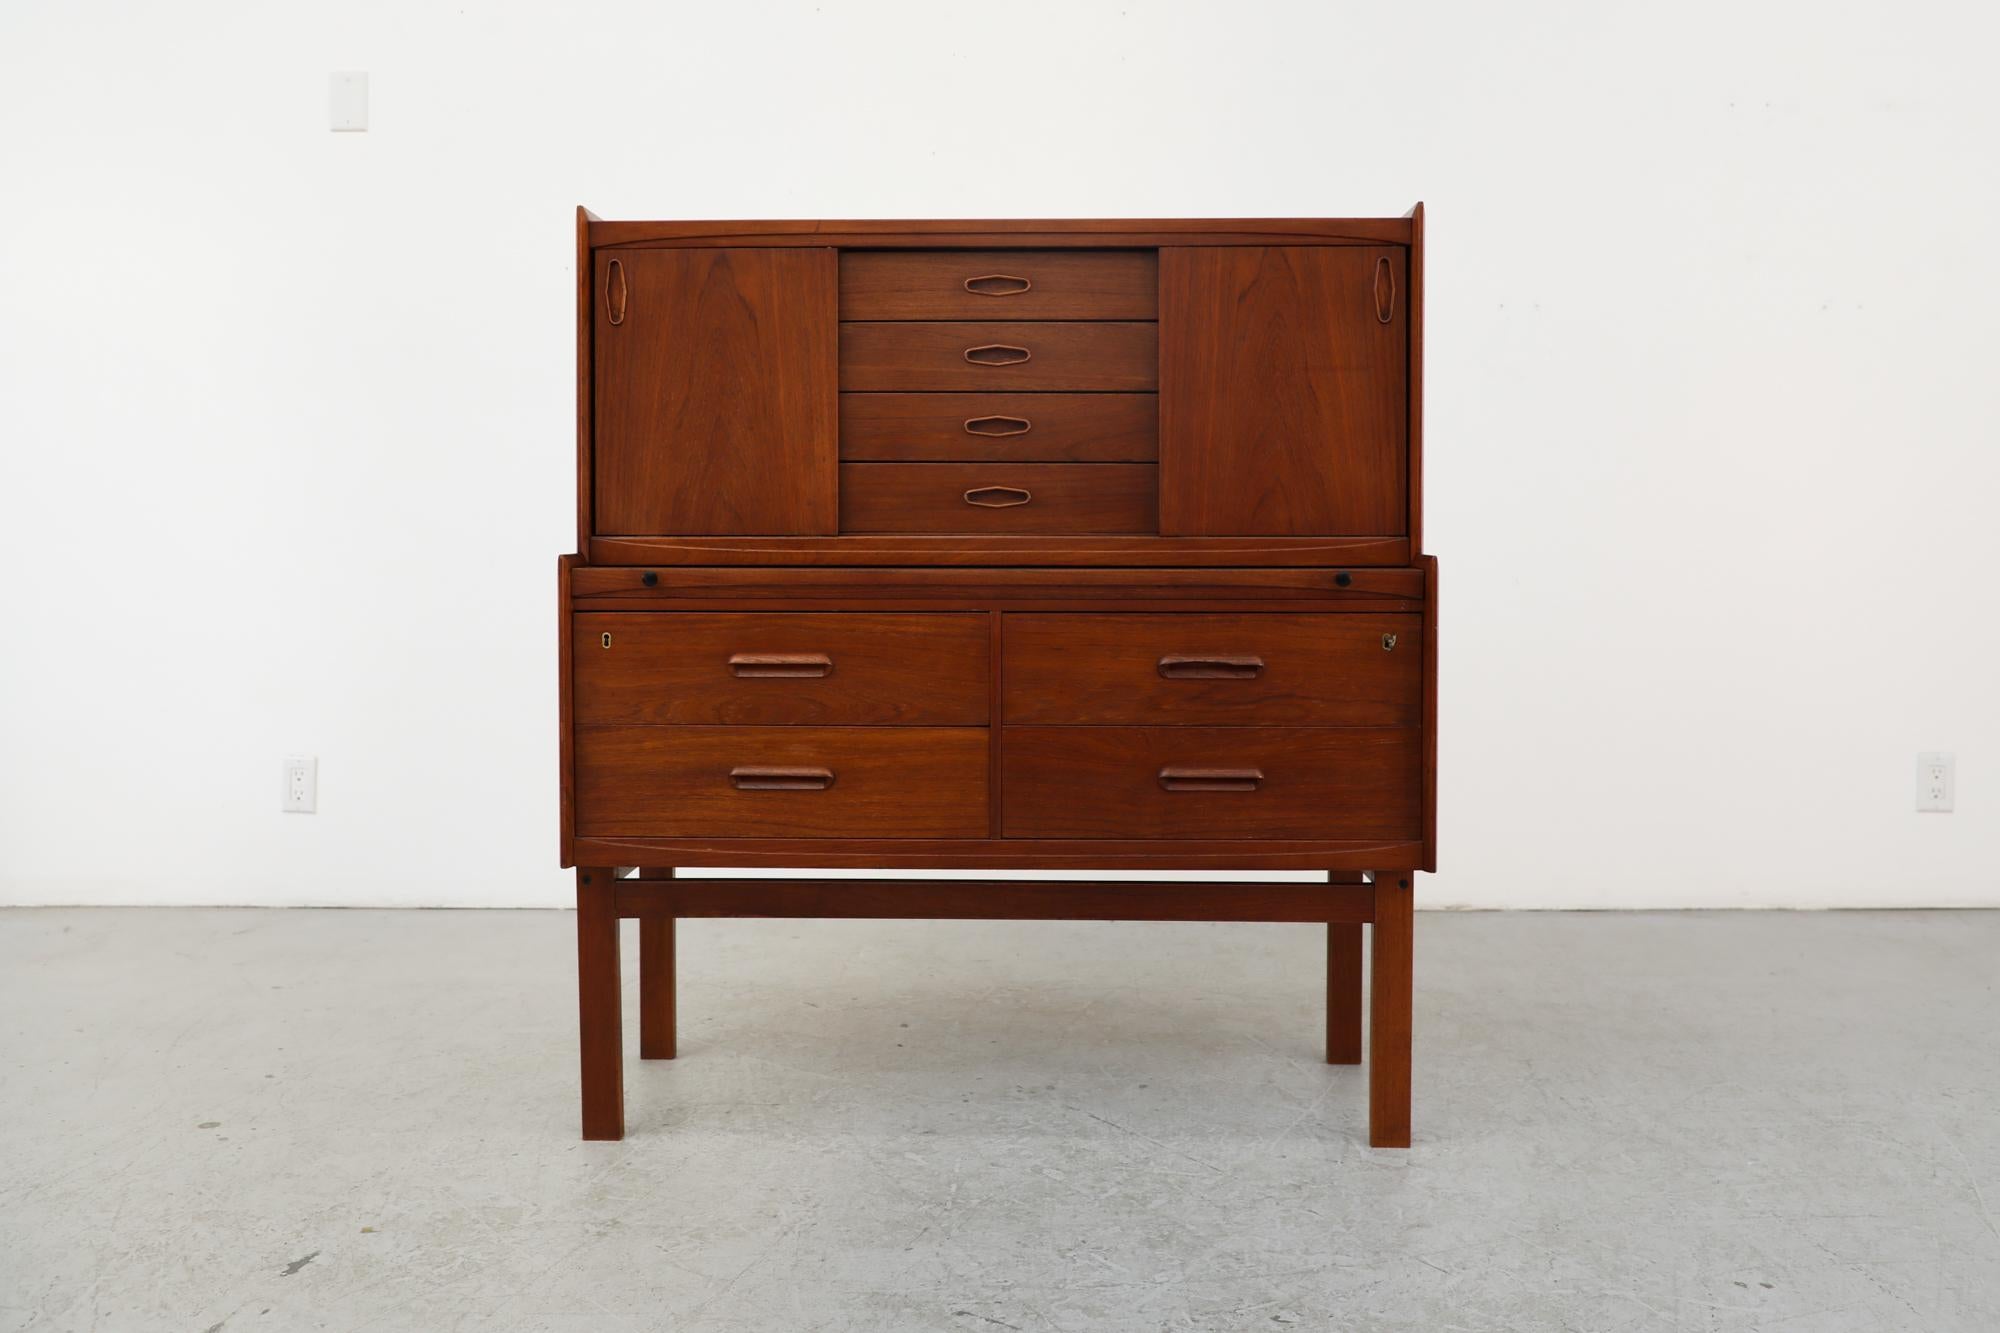 Mid-century Danish teak secretaire with hidden desk top, locking lower drawer and upper cabinets. Often used as a vanity, desk and/or dresser. The top portion has 2 sliding doors and 3 stacking drawers with organically carved inset handle pulls. The